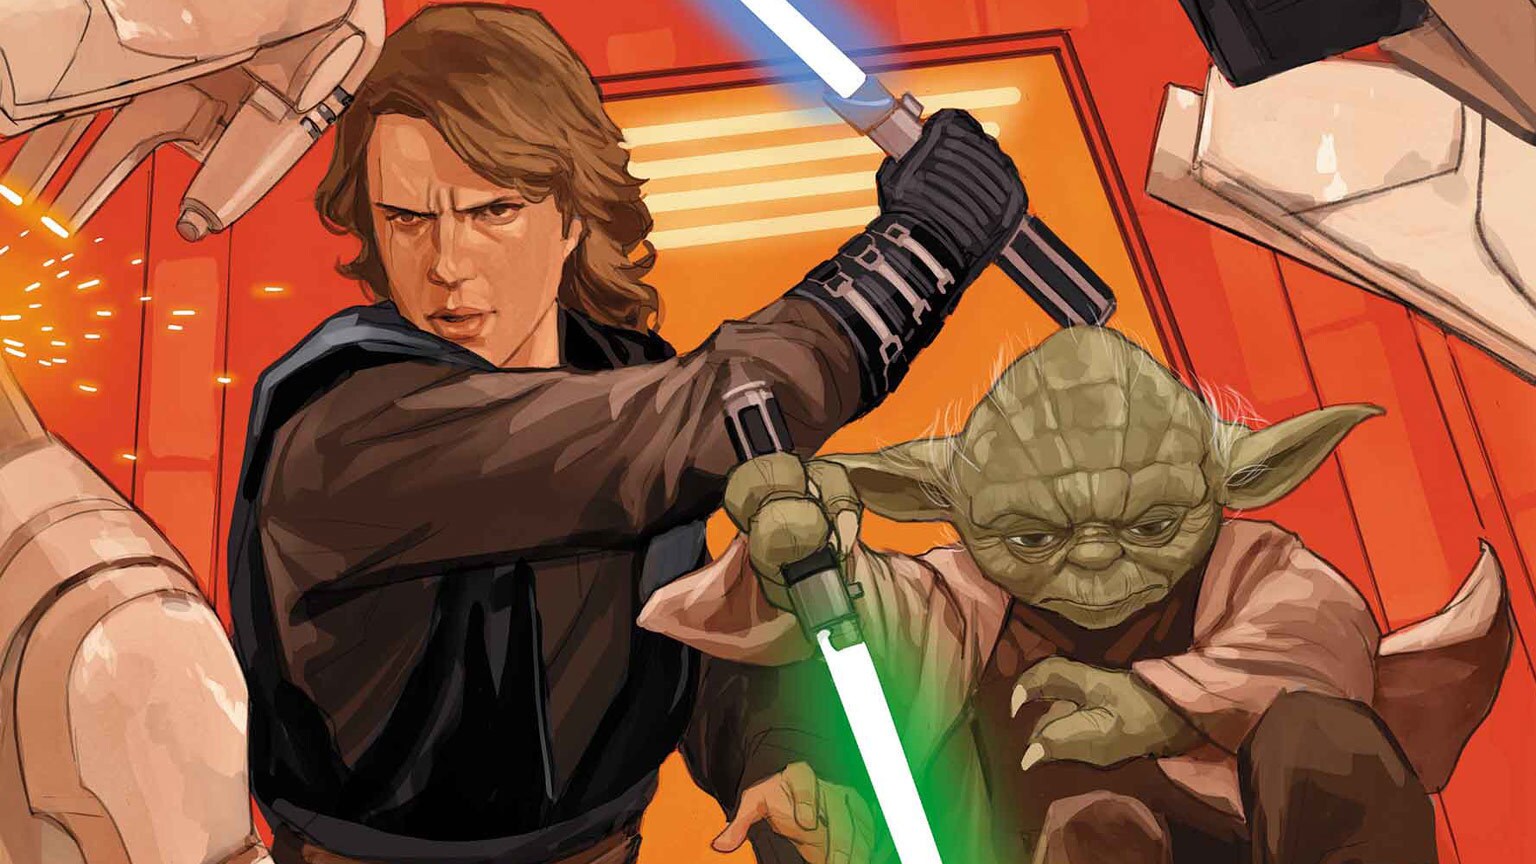 Master Yoda and Anakin Skywalker Team Up in Marvel’s June 2023 Star Wars Comics – Exclusive Preview